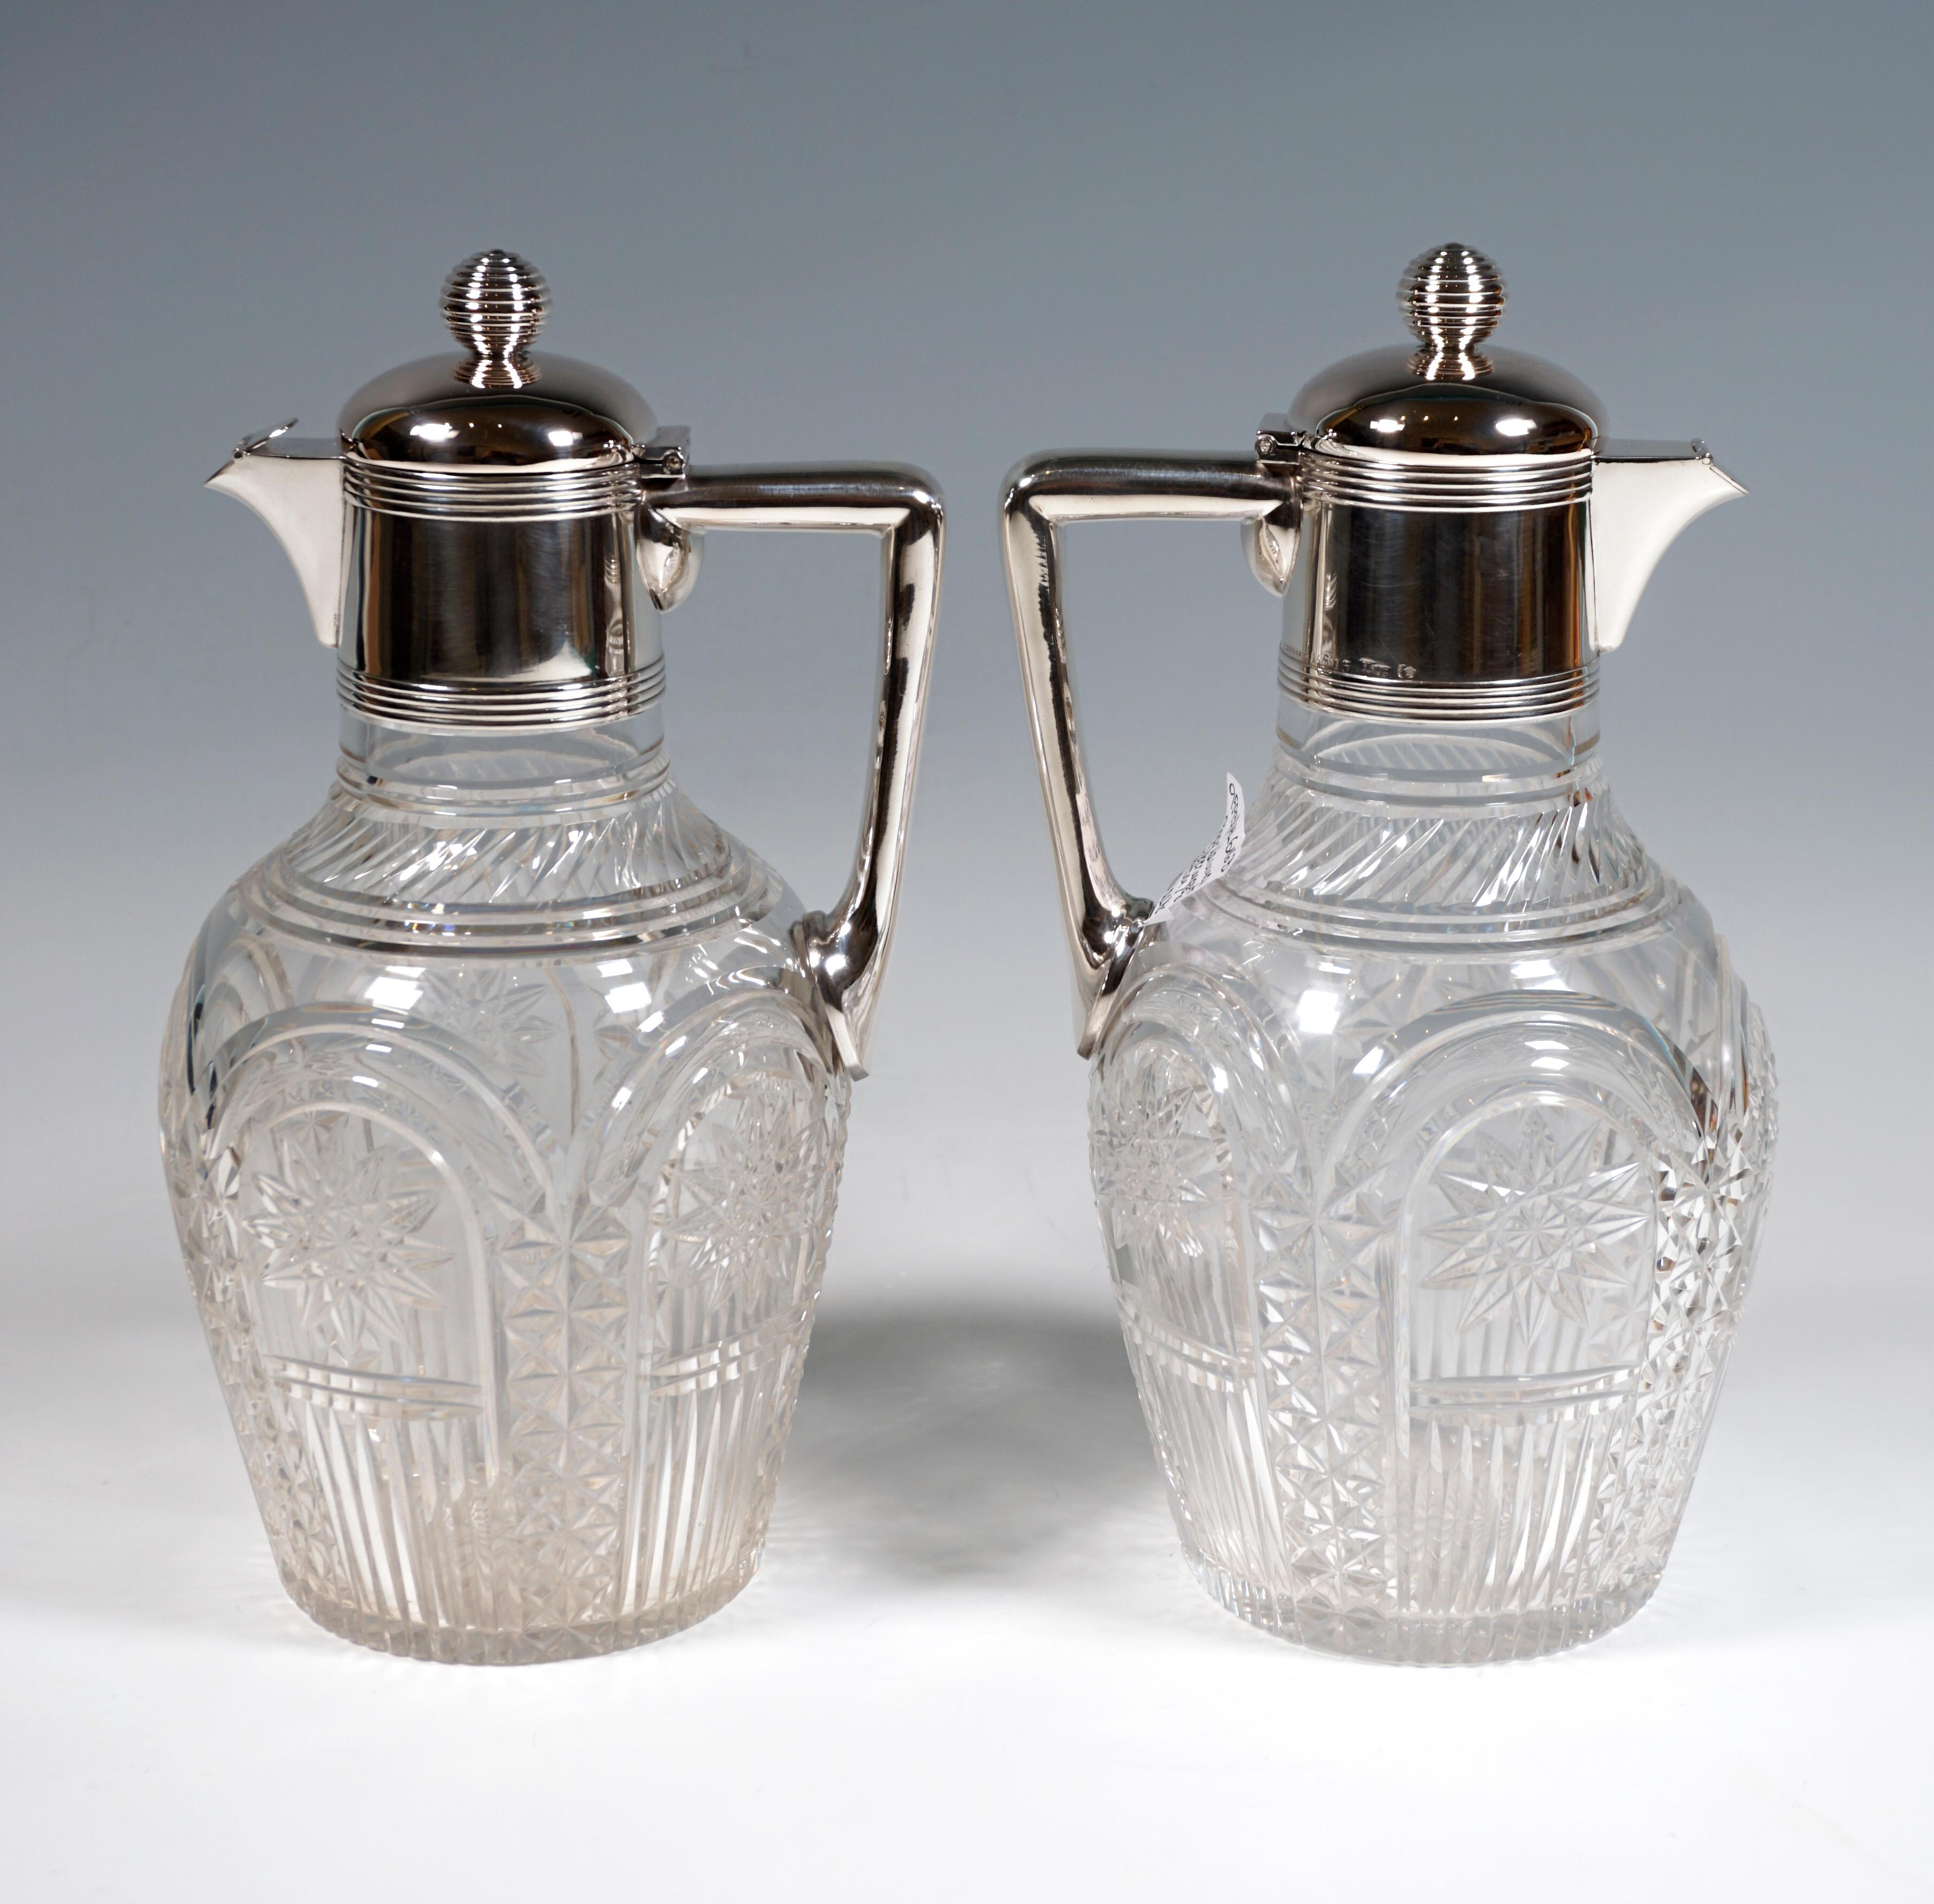 Two carafes made of clear glass with a raised, bulging body, surrounding five cut arches with stone cut decoration and cut suns in the arch segments, bevel cut at the base of the neck, bottom star, silver fittings grooved at the base and at the